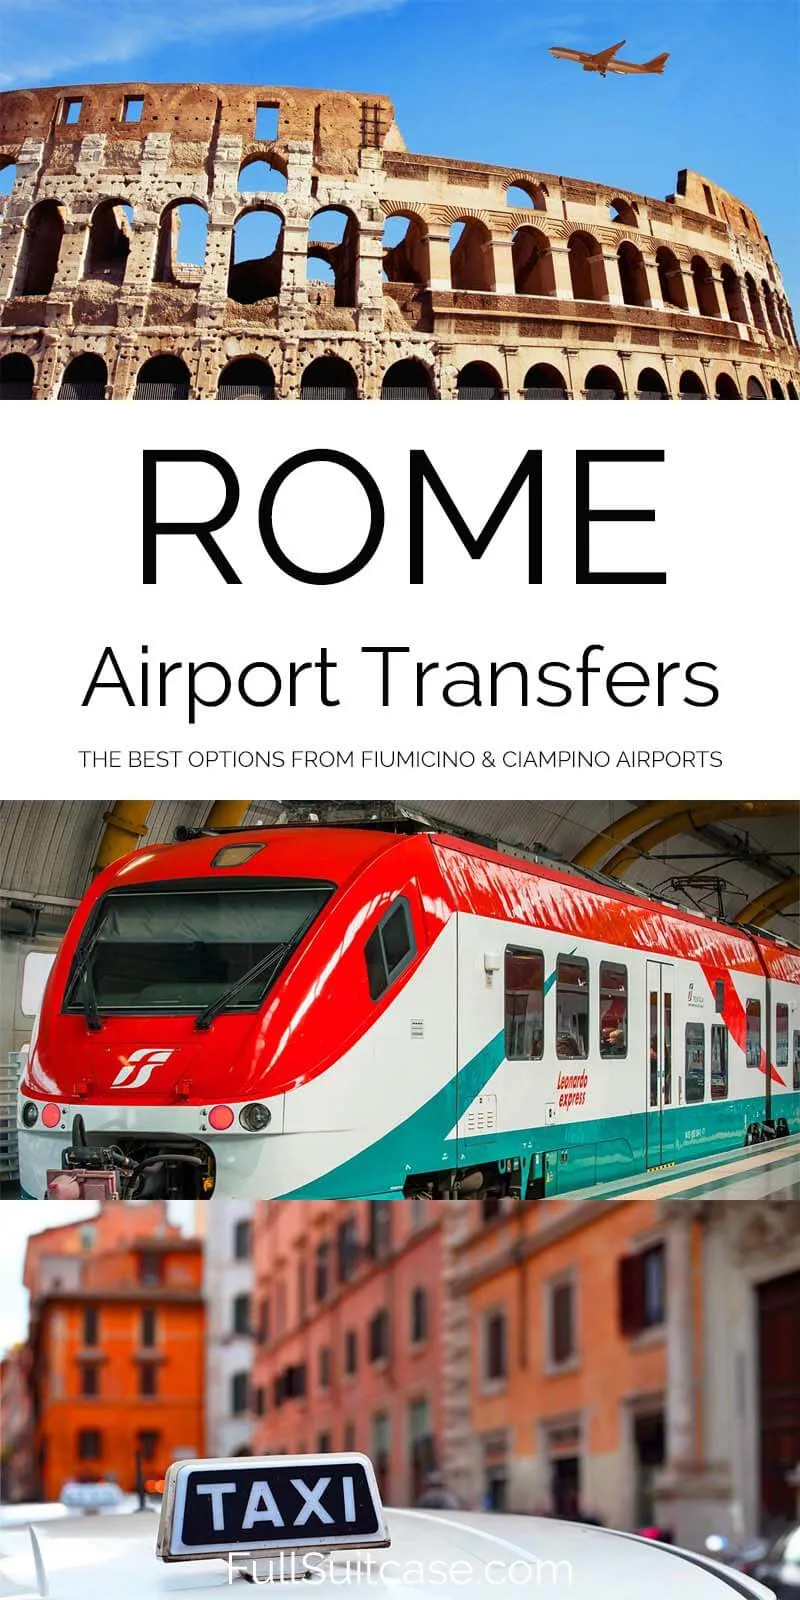 Complete guide to Rome airport transfers from Fiumicino and Ciampino airports to the city center